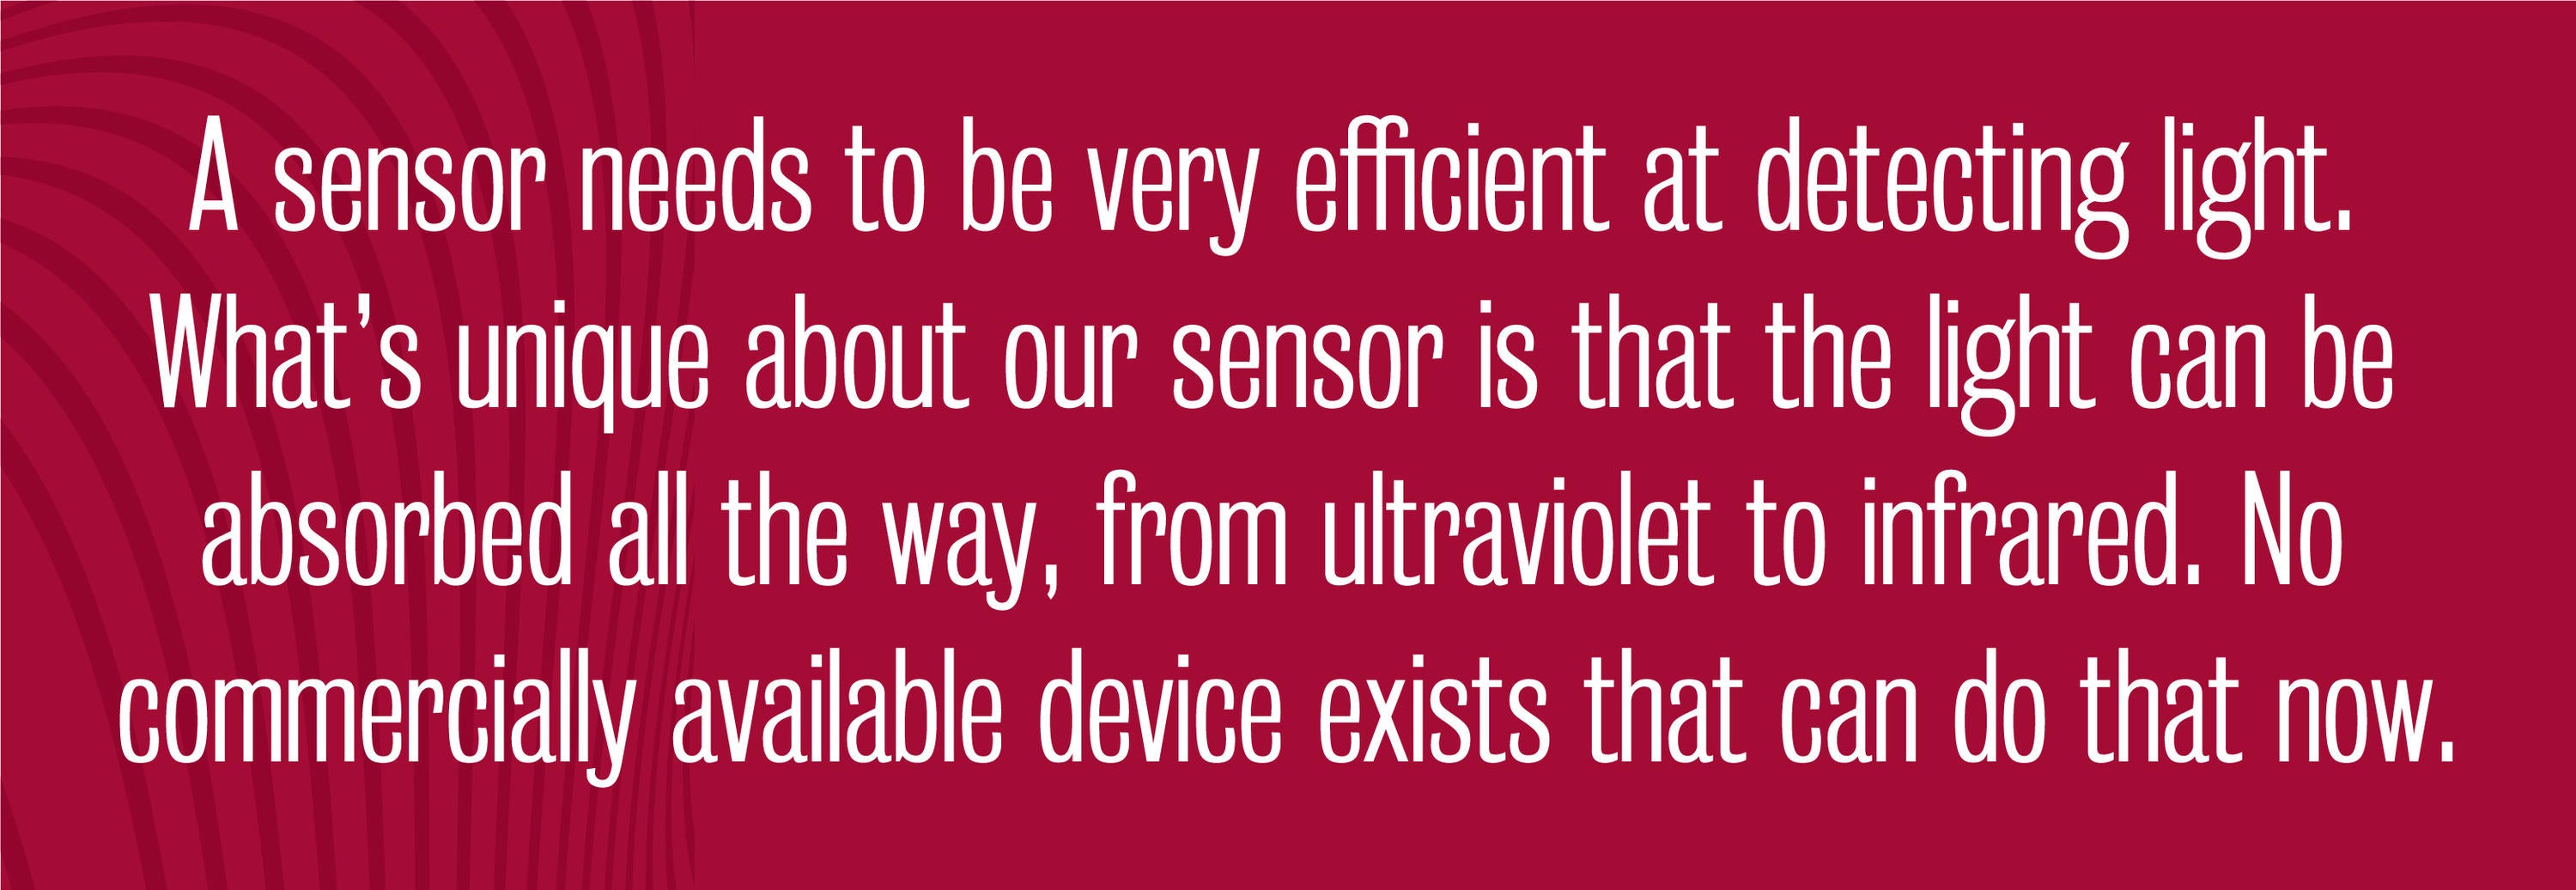 Quote - A sensor needs to be very efficient at detecting light. What’s unique about our sensor is that the light can be absorbed all the way, from ultraviolet to infrared. No commercially available device exists that can do that now.